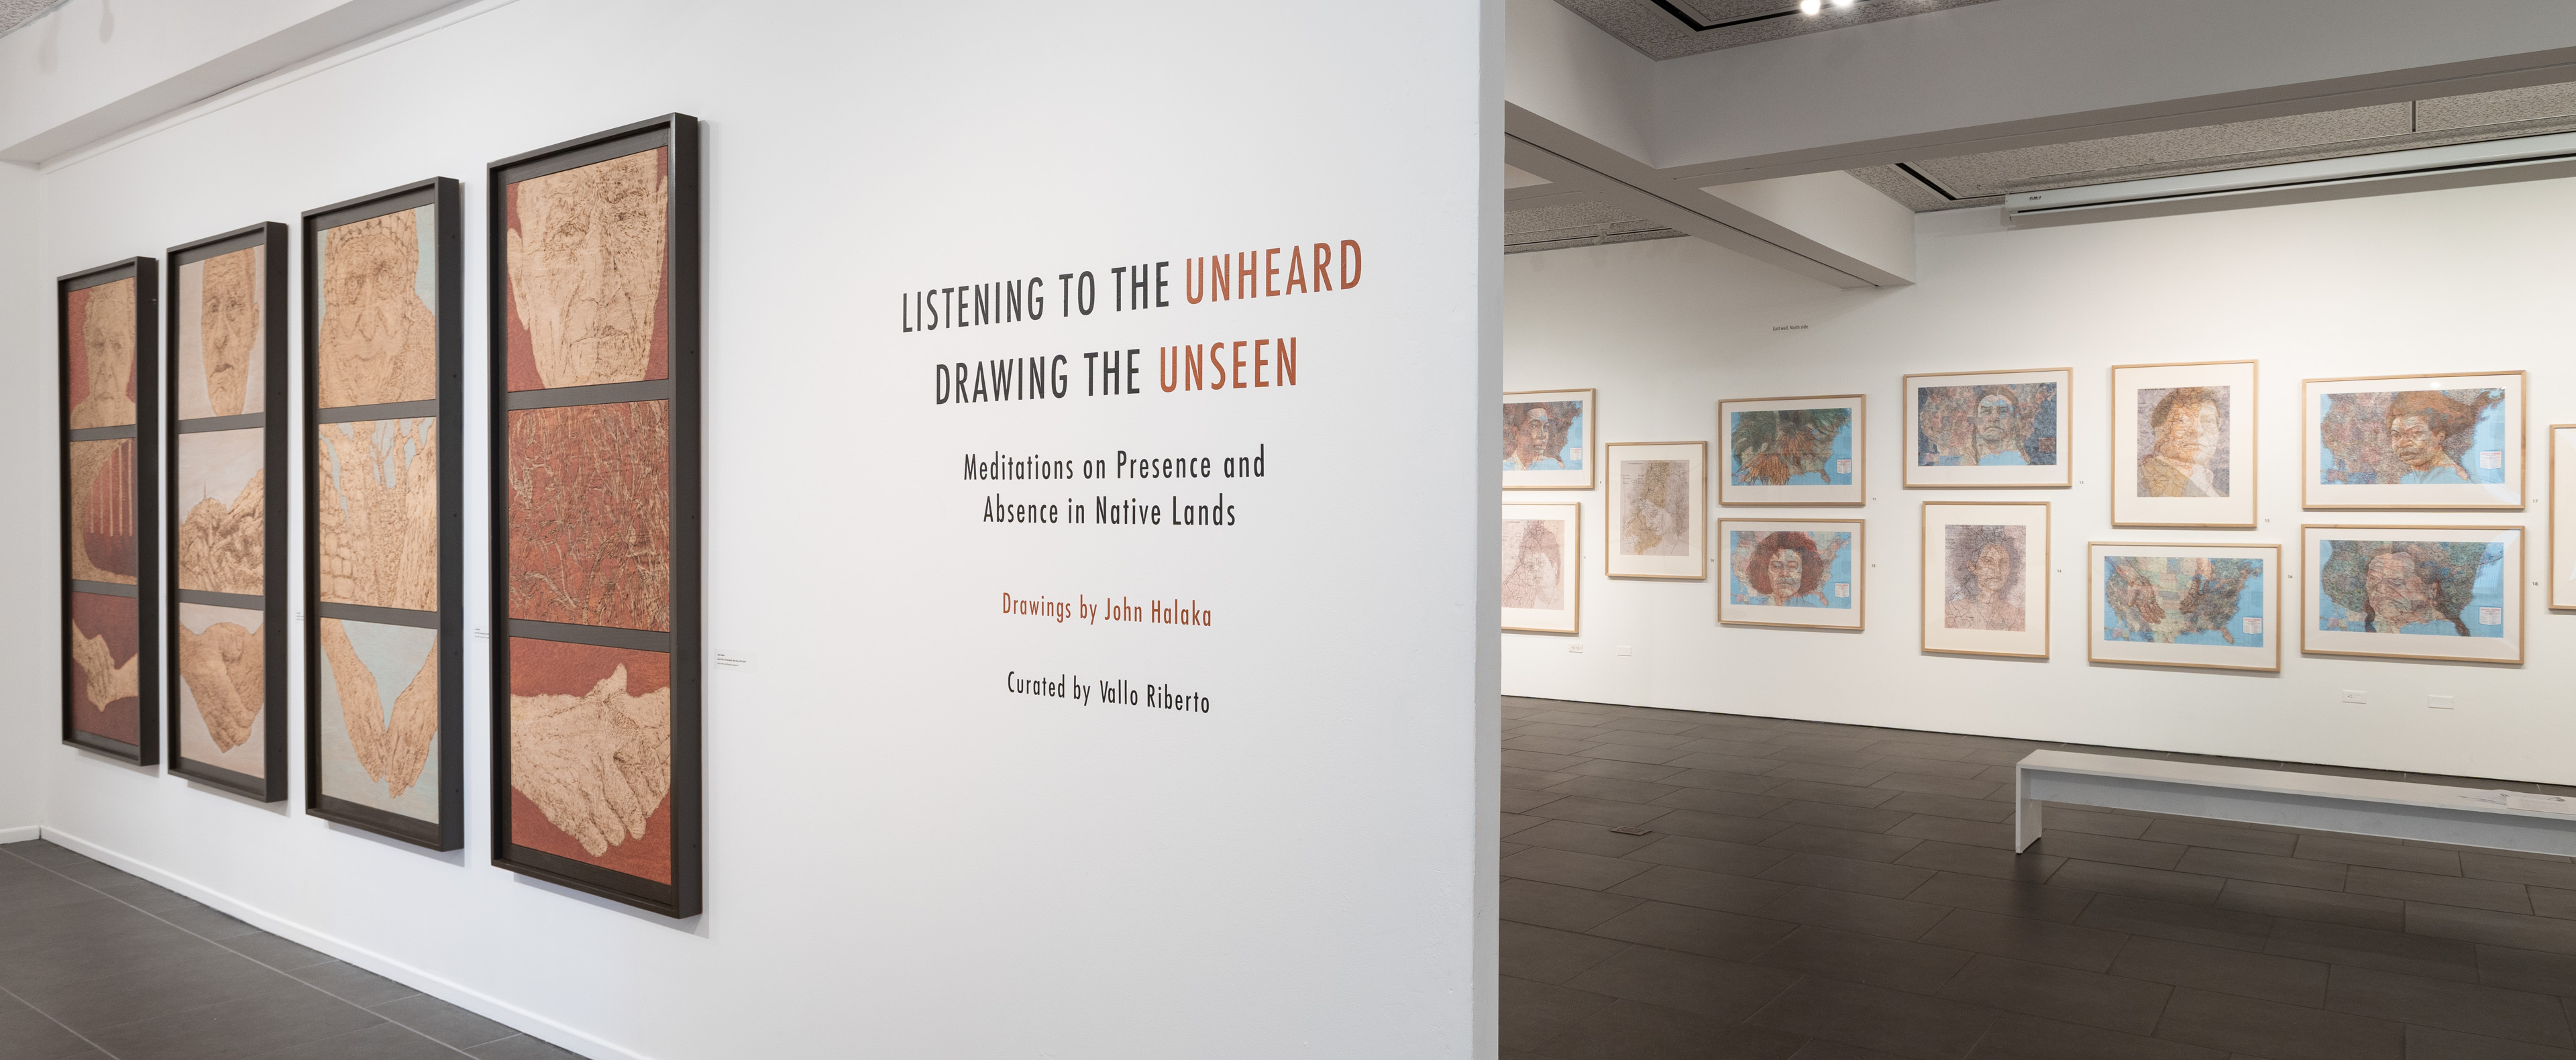 LISTENING TO THE UNHEARD / DRAWING THE UNSEEN MEDITATIONS ON PRESENCE AND ABSENCE IN NATIVE LANDS DRAWINGS BY JOHN HALAKA Installed at OMA